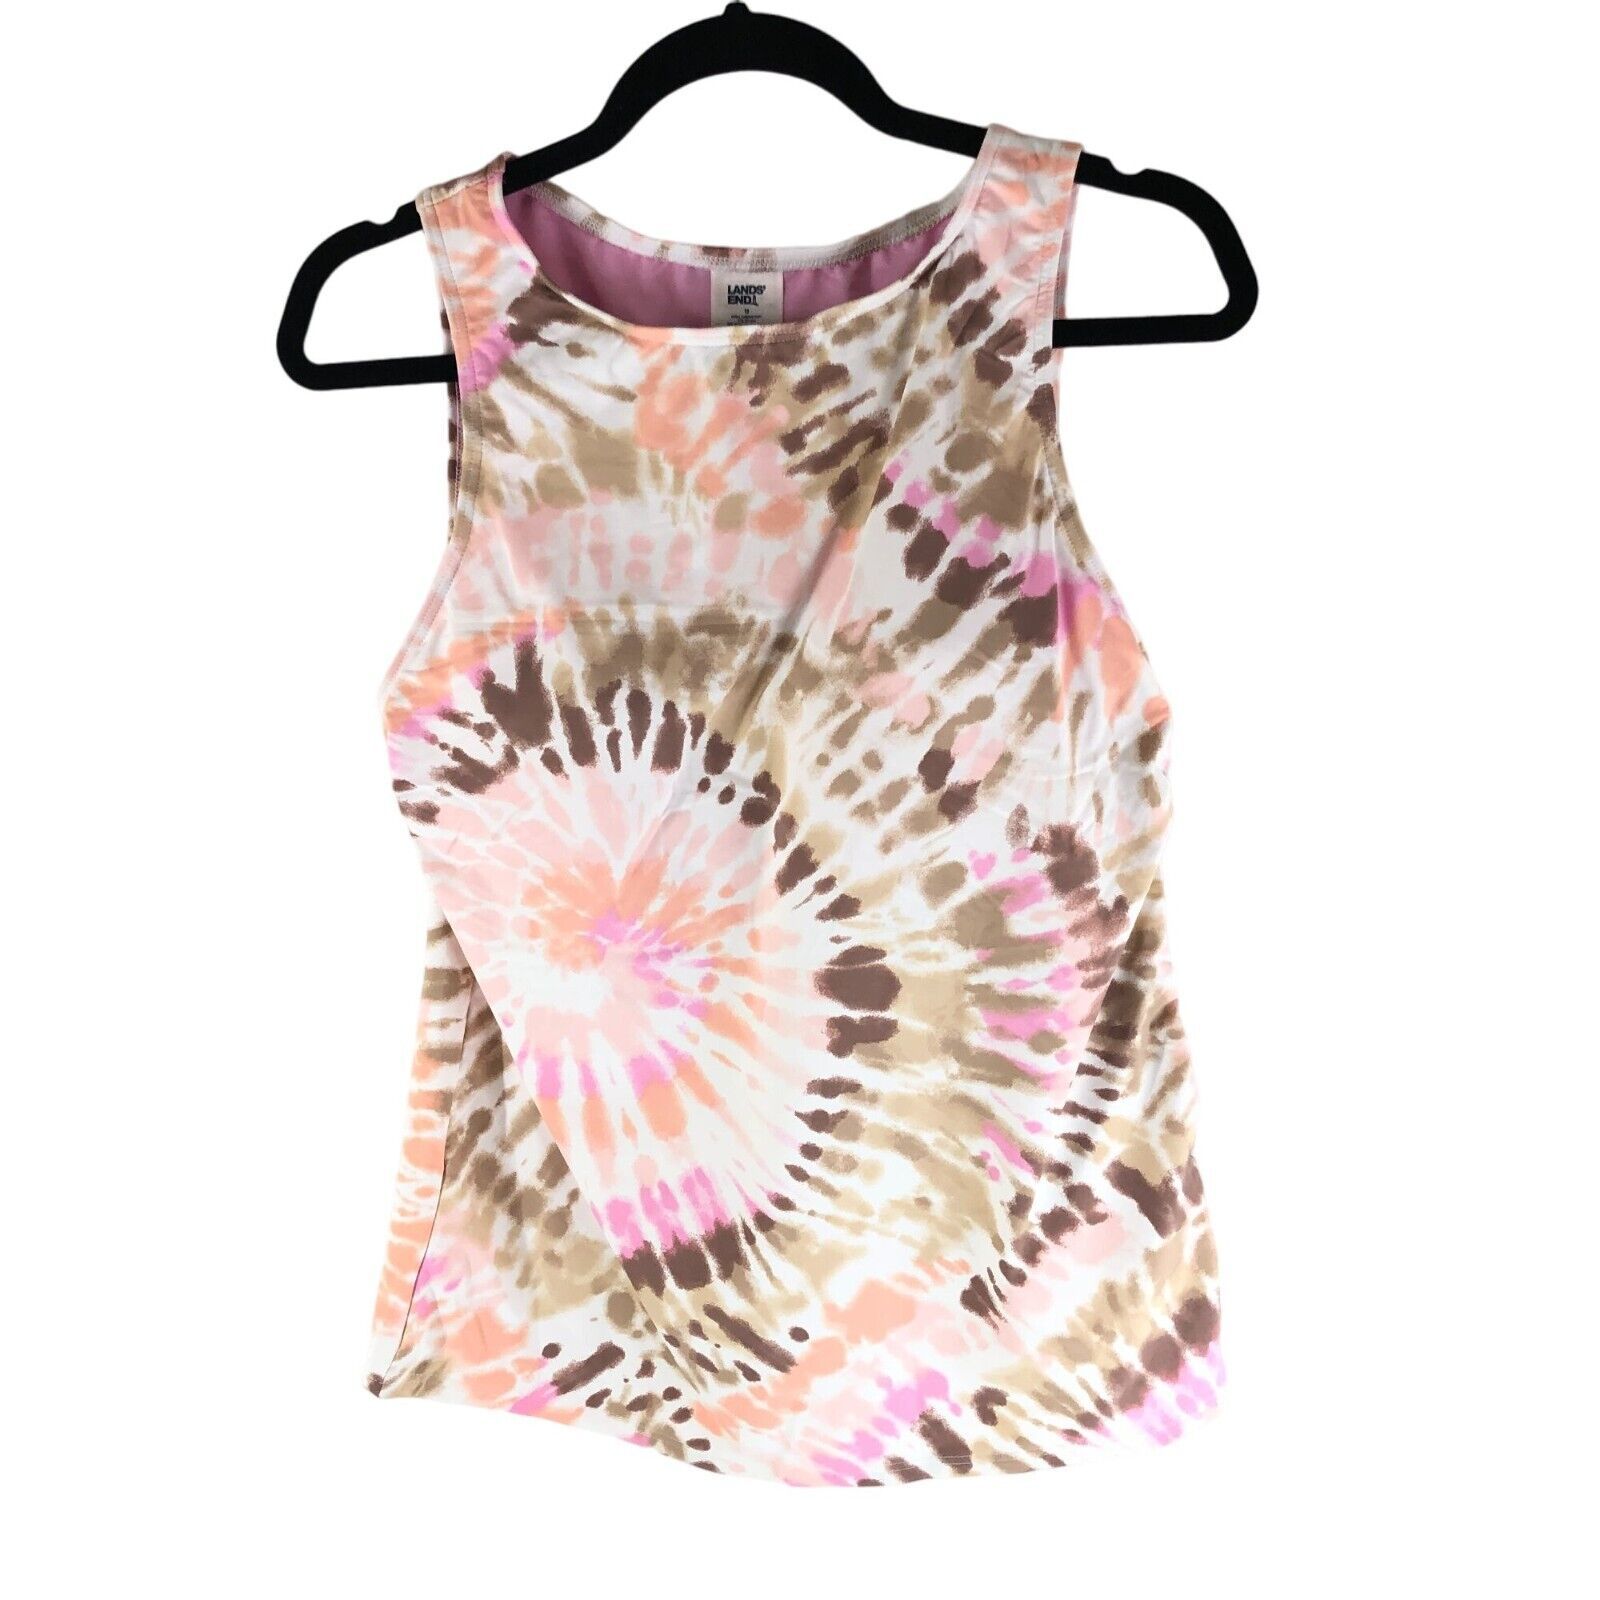 Primary image for Lands End Chlorine Resist High Neck UPF 50 Modest Tankini Top White Tie Dye 2